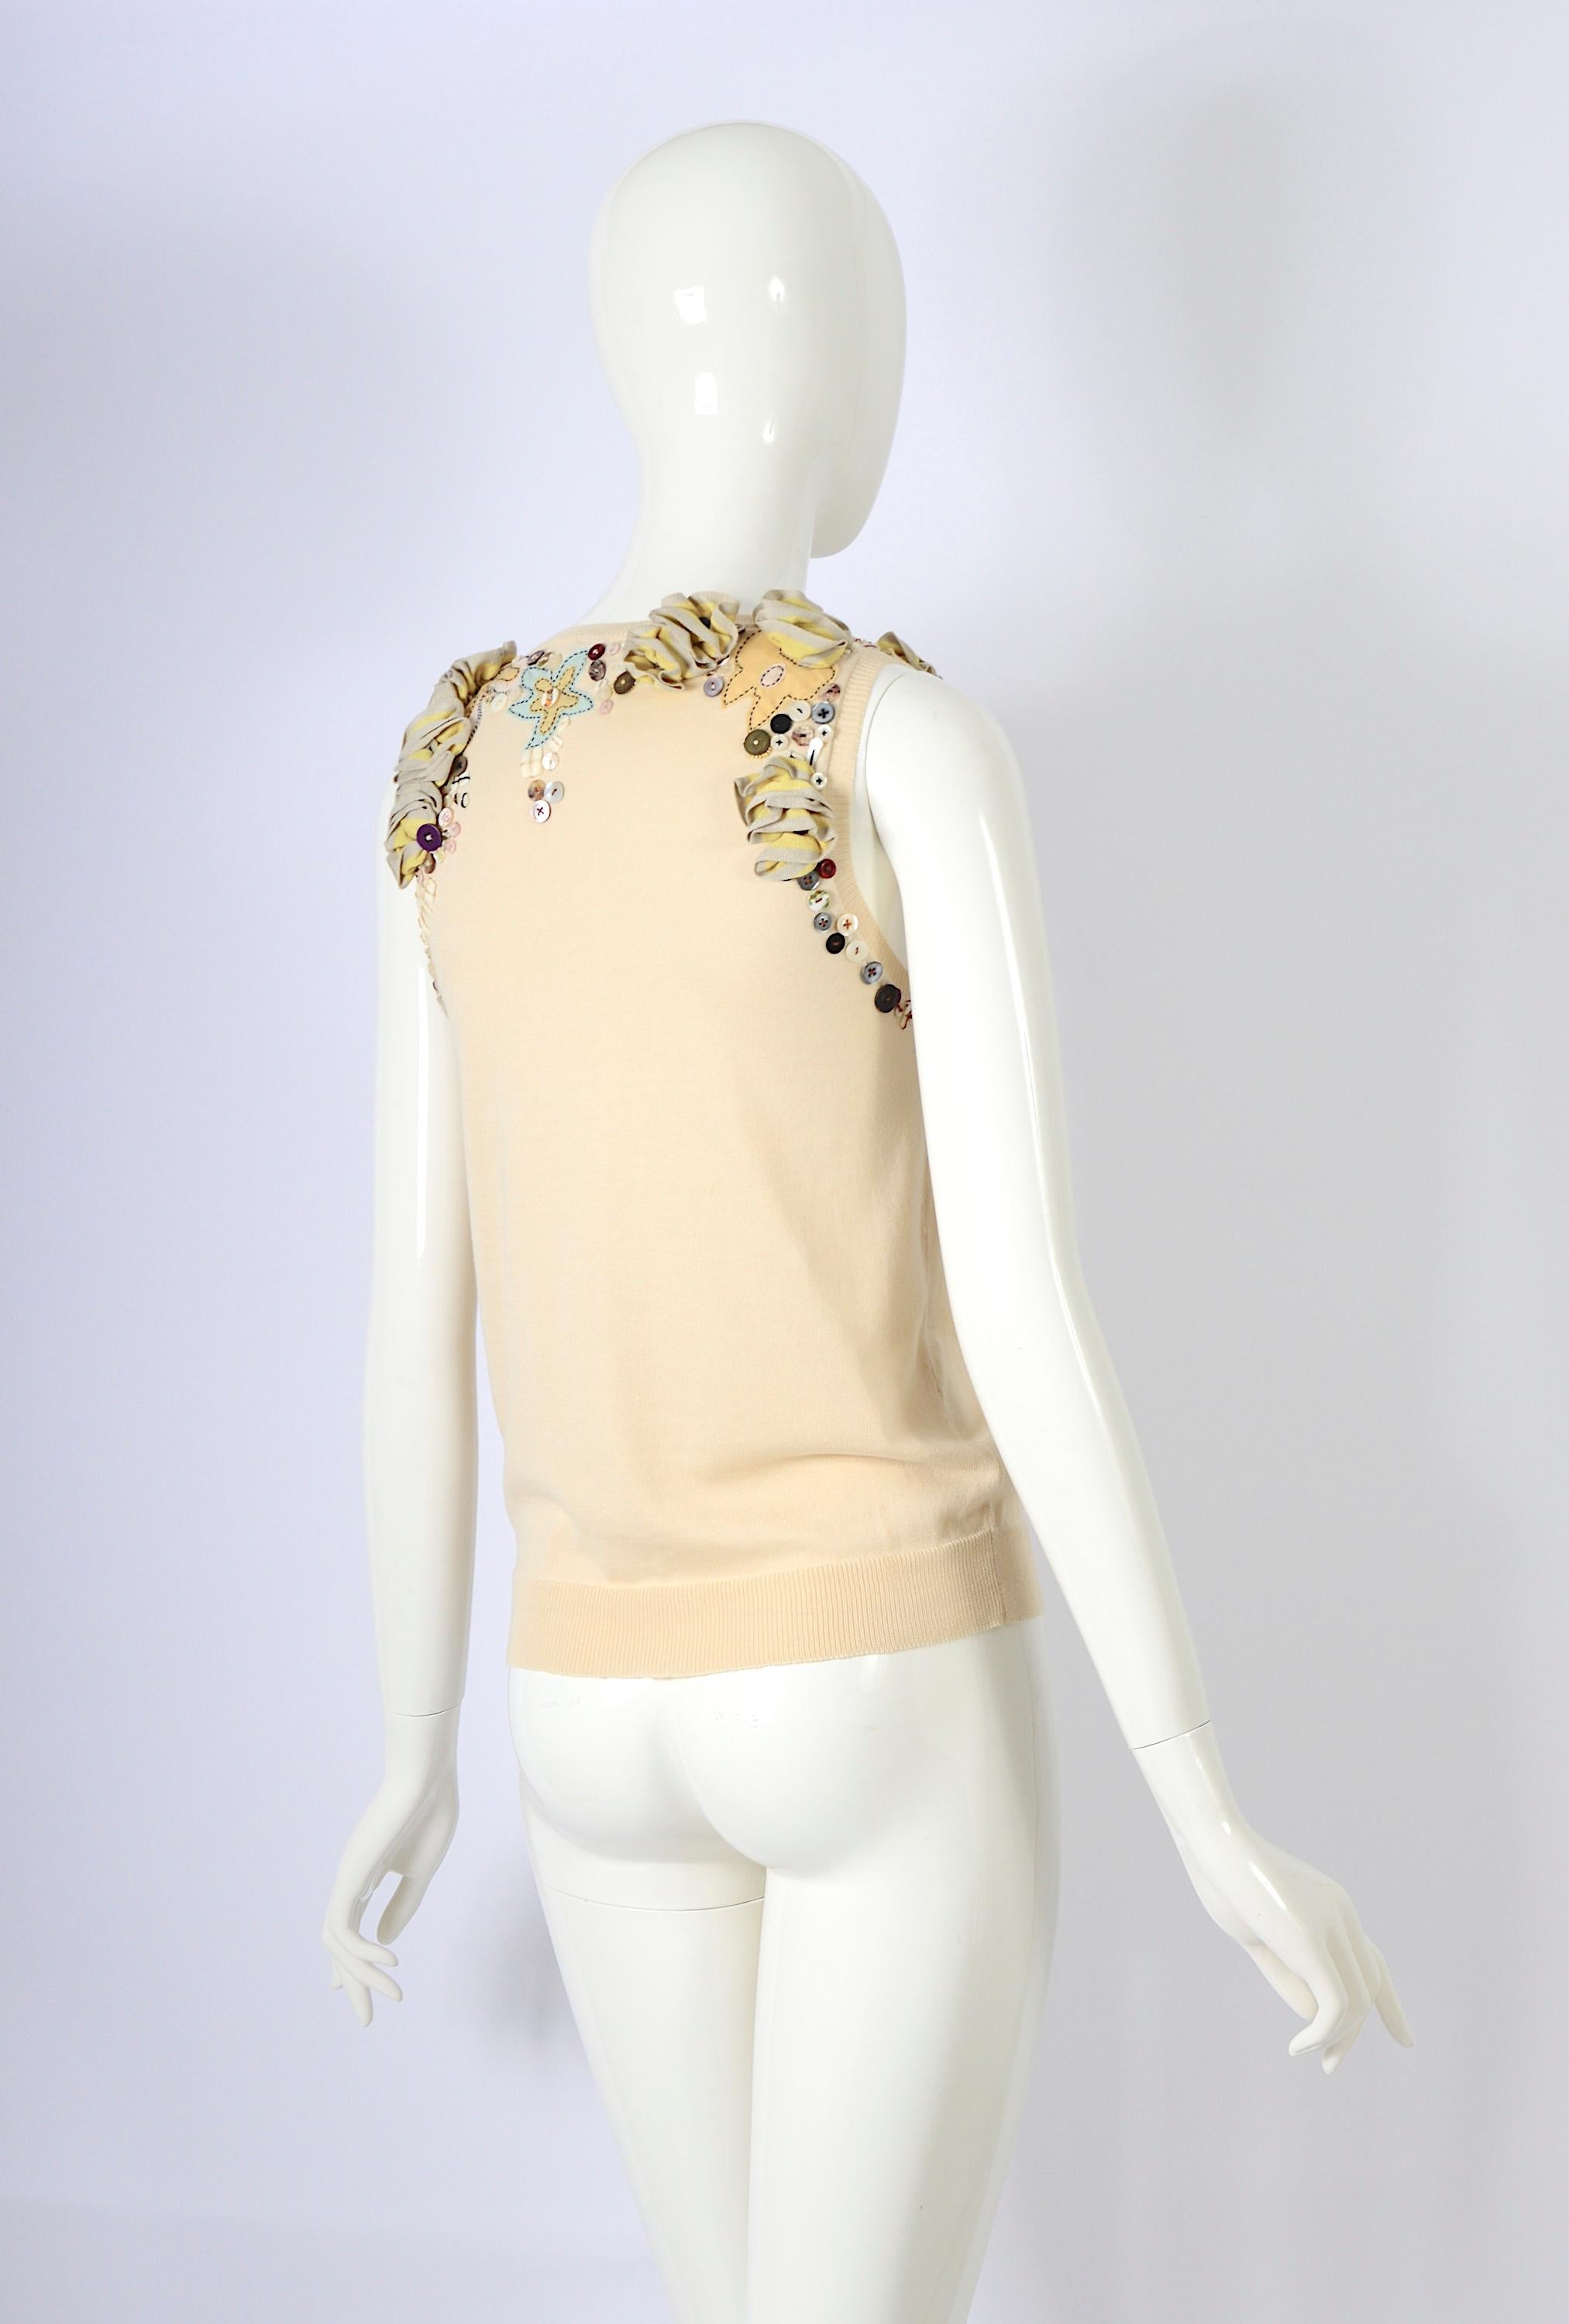 Women's Alexander McQueen vintage hand embroidered and button embellished knit top. For Sale